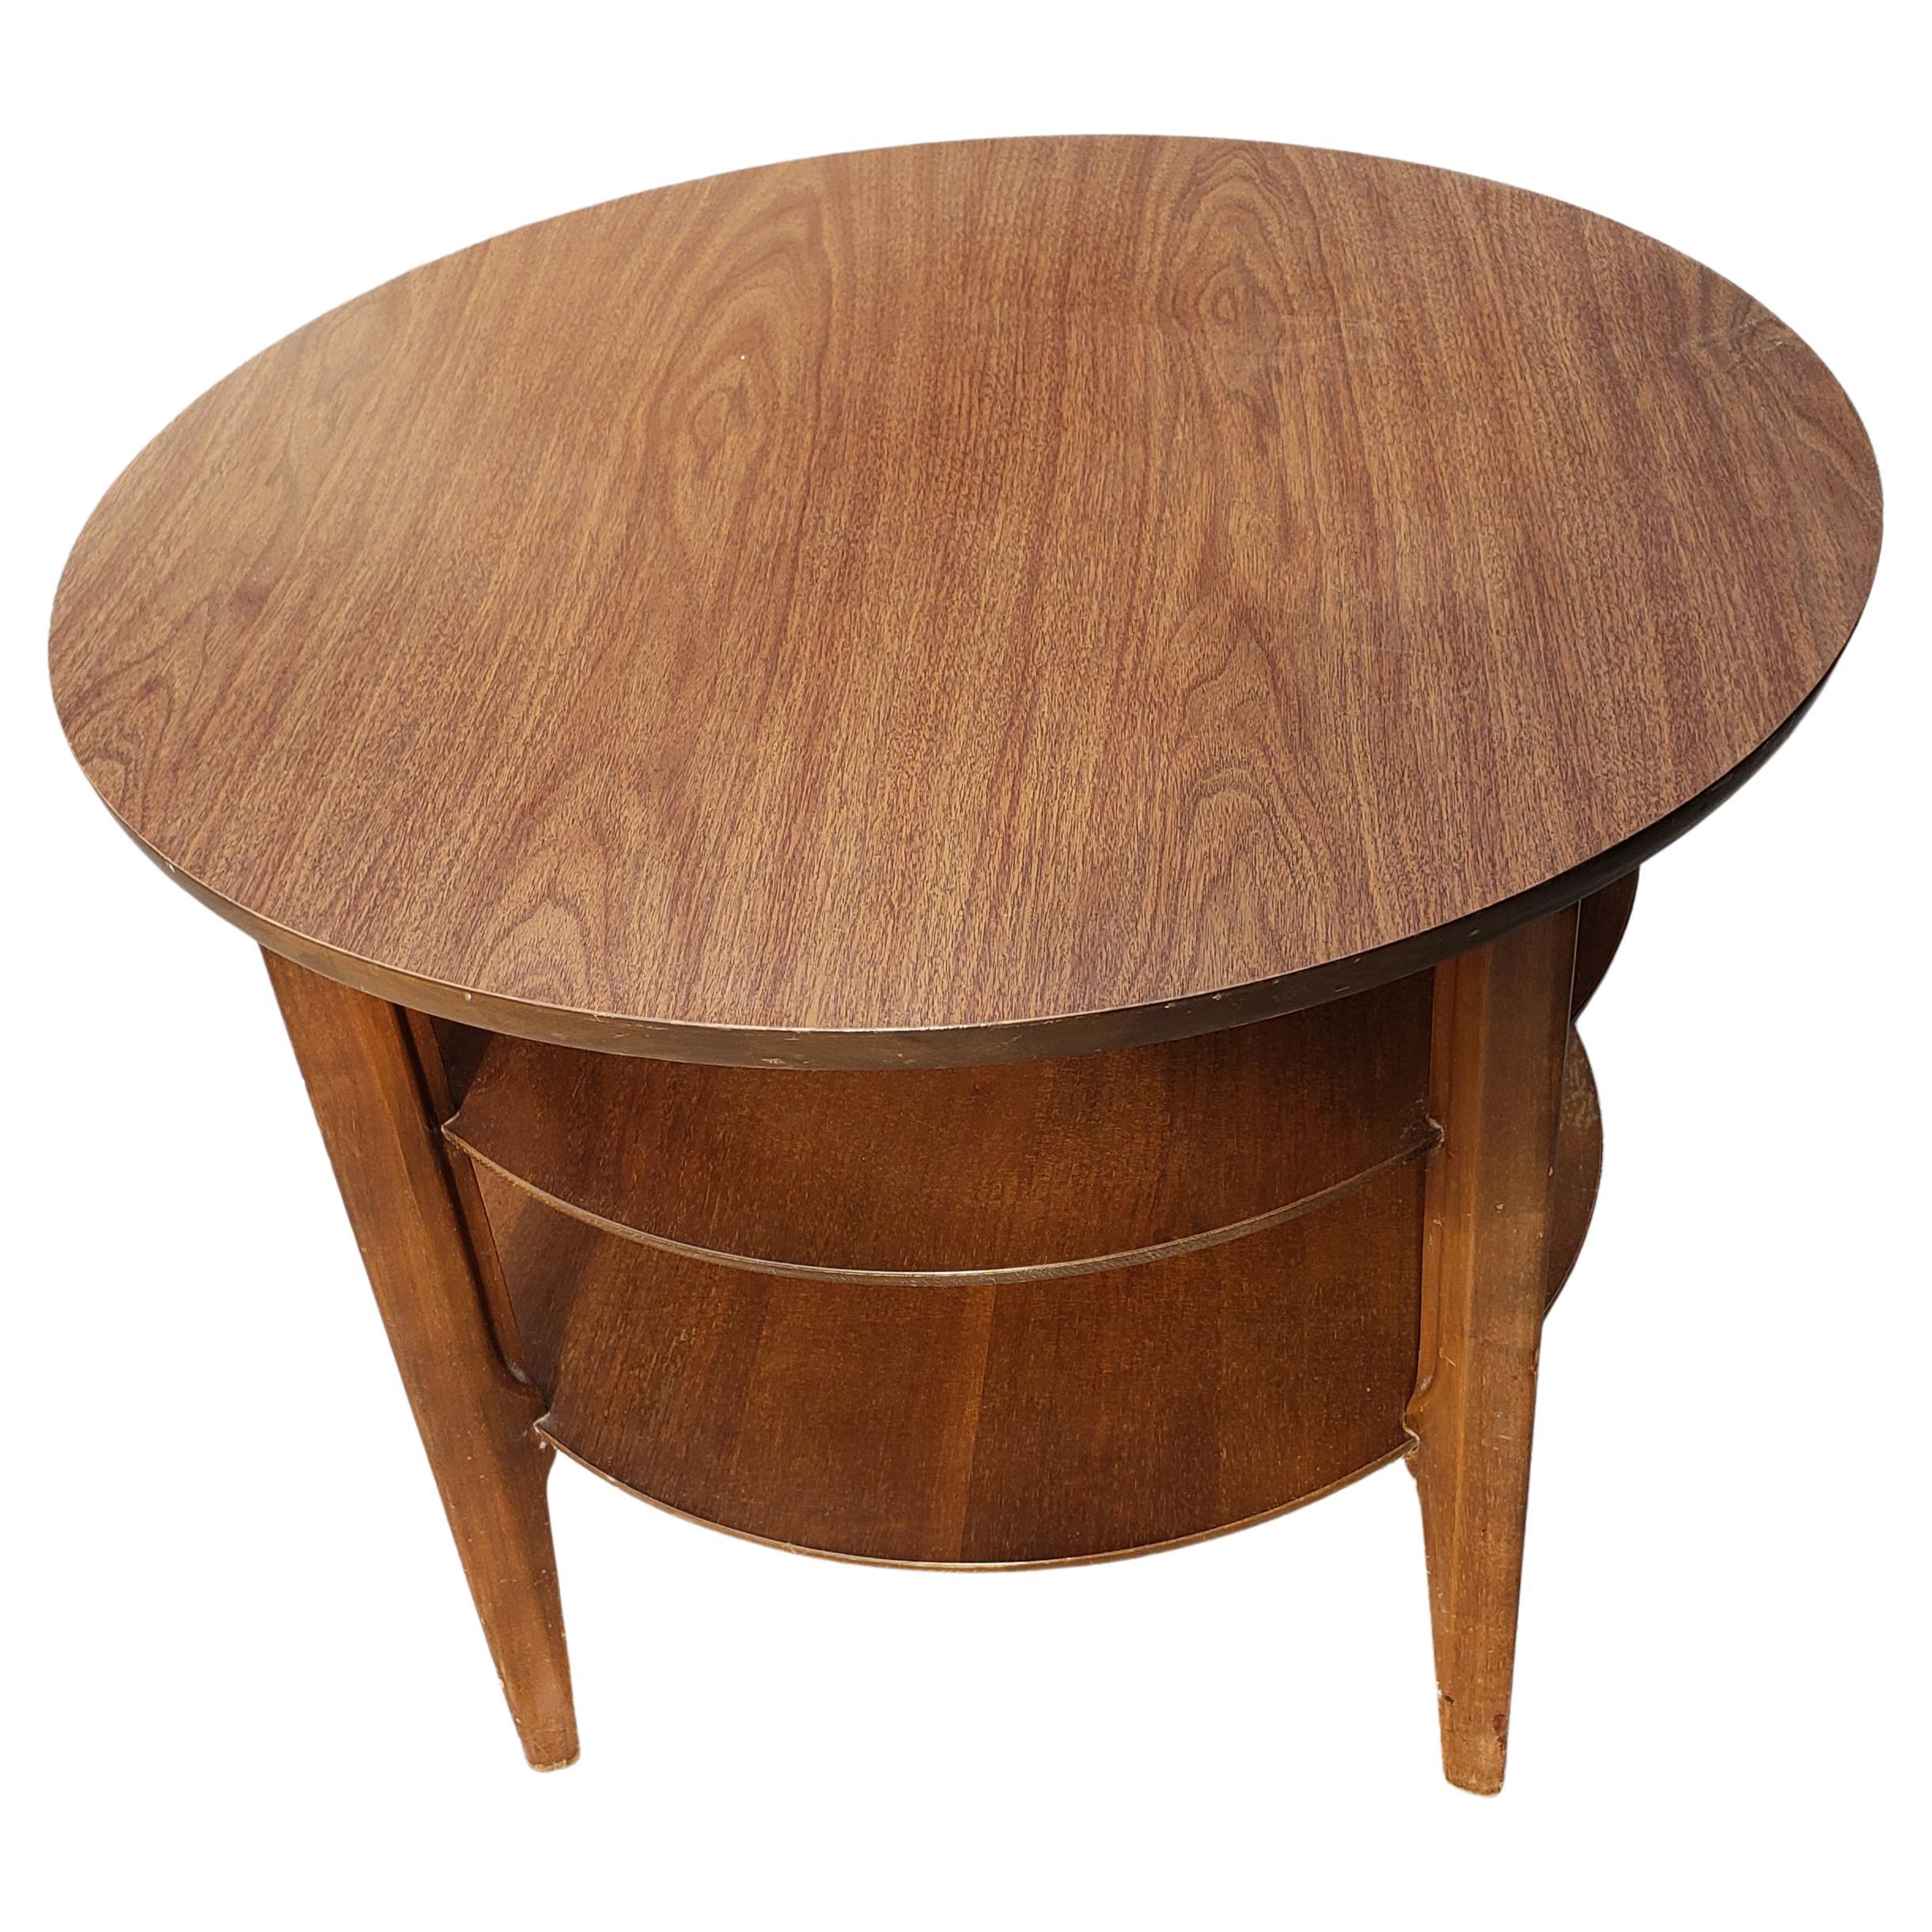 3 tier round coffee table